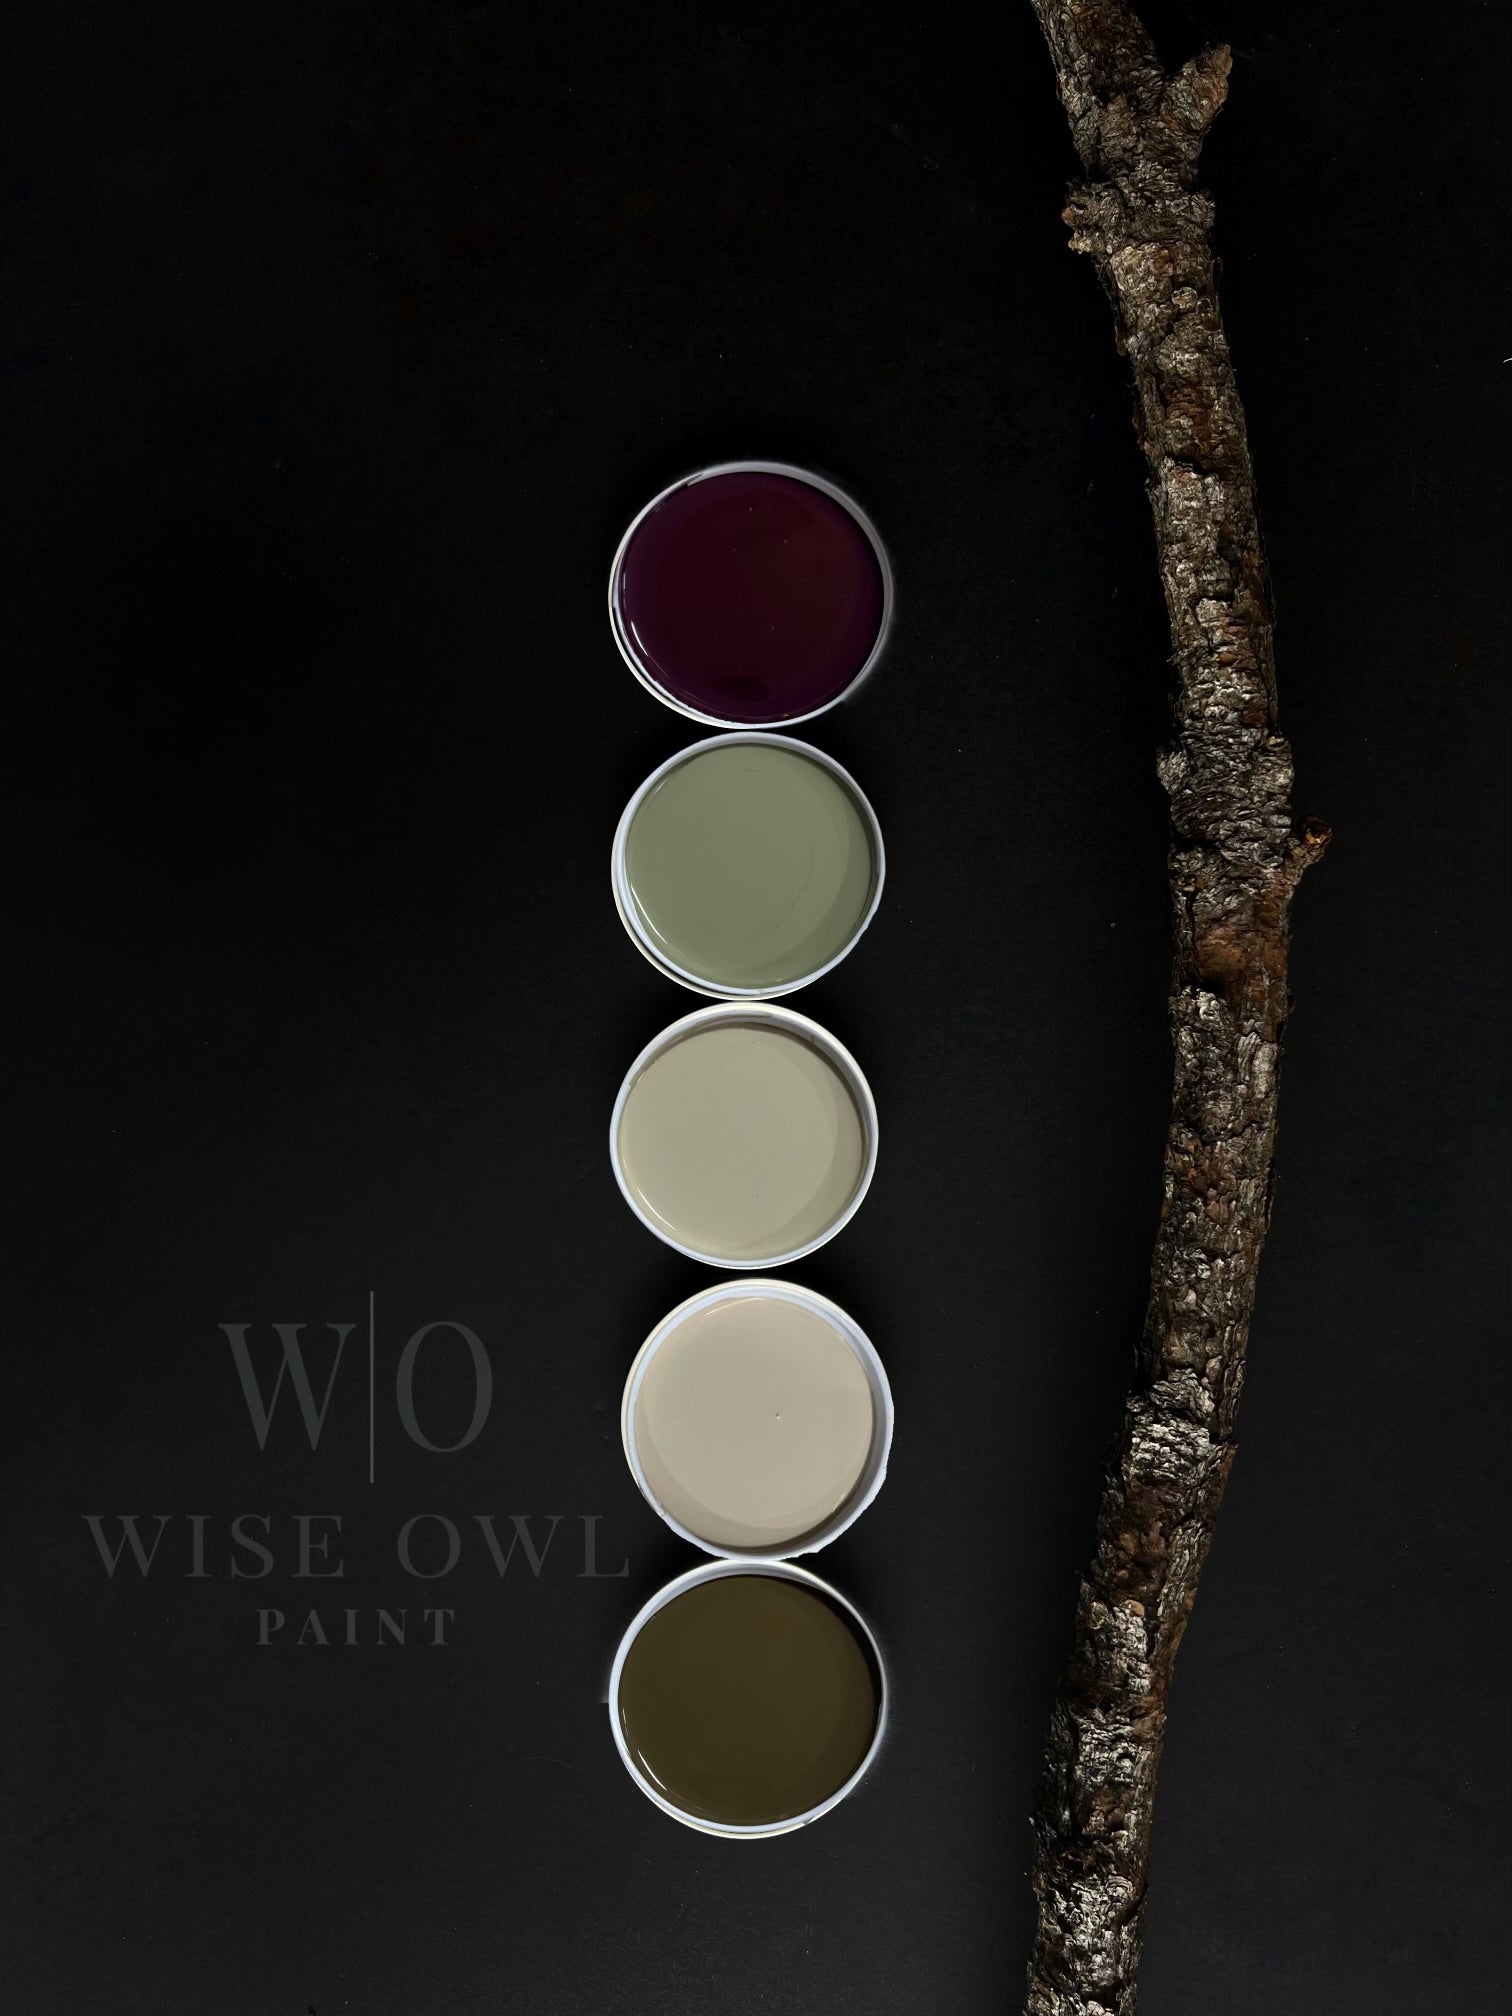 wise owl paint one hour enamel wilderness collection paint samples on a dark gray background. large wood stick laying next to them